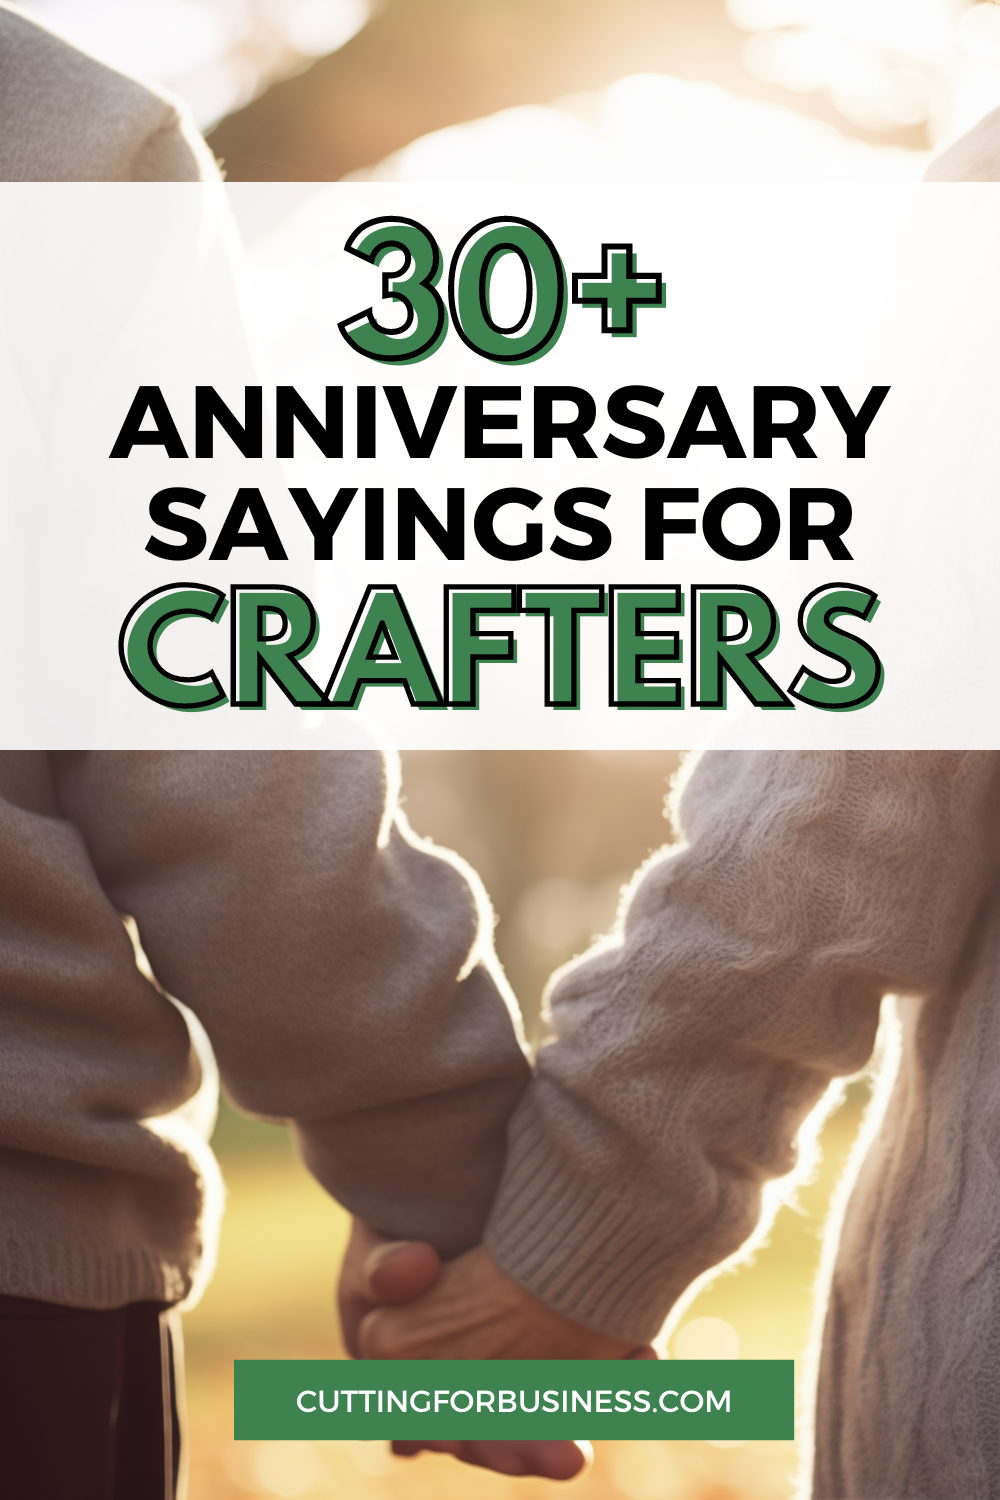 30+ Anniversary Sayings for Crafters - cuttingforbusiness.com